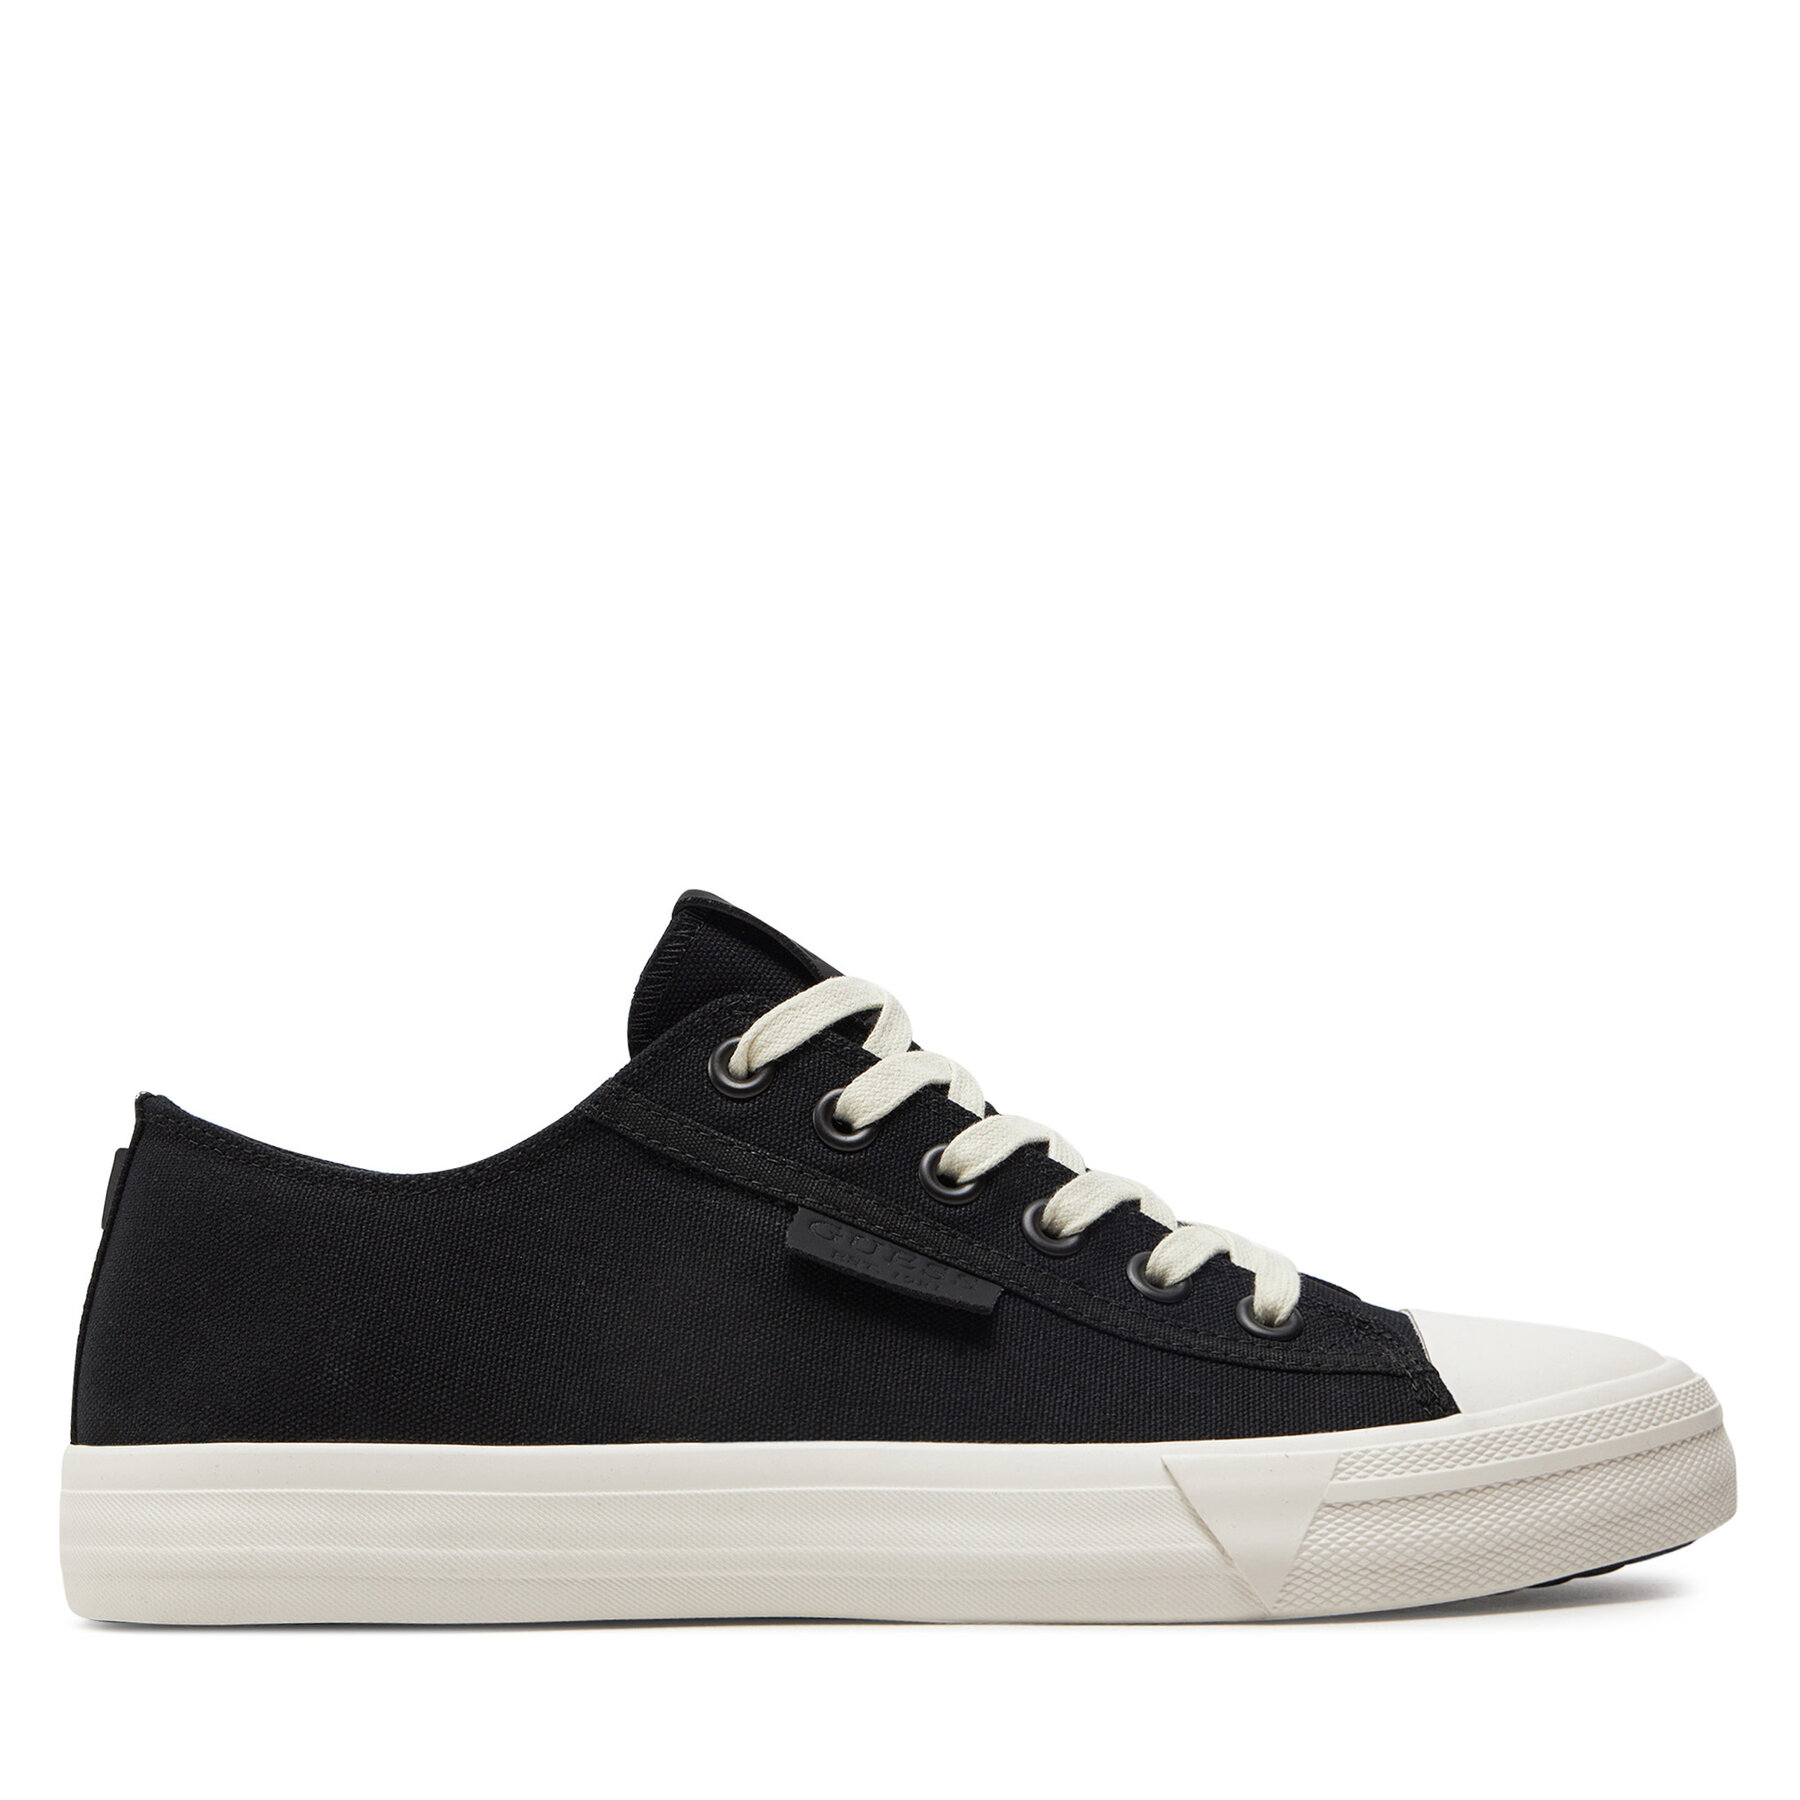 Sneakers Guess Rio FMGRIO FAB12 BLACK von Guess